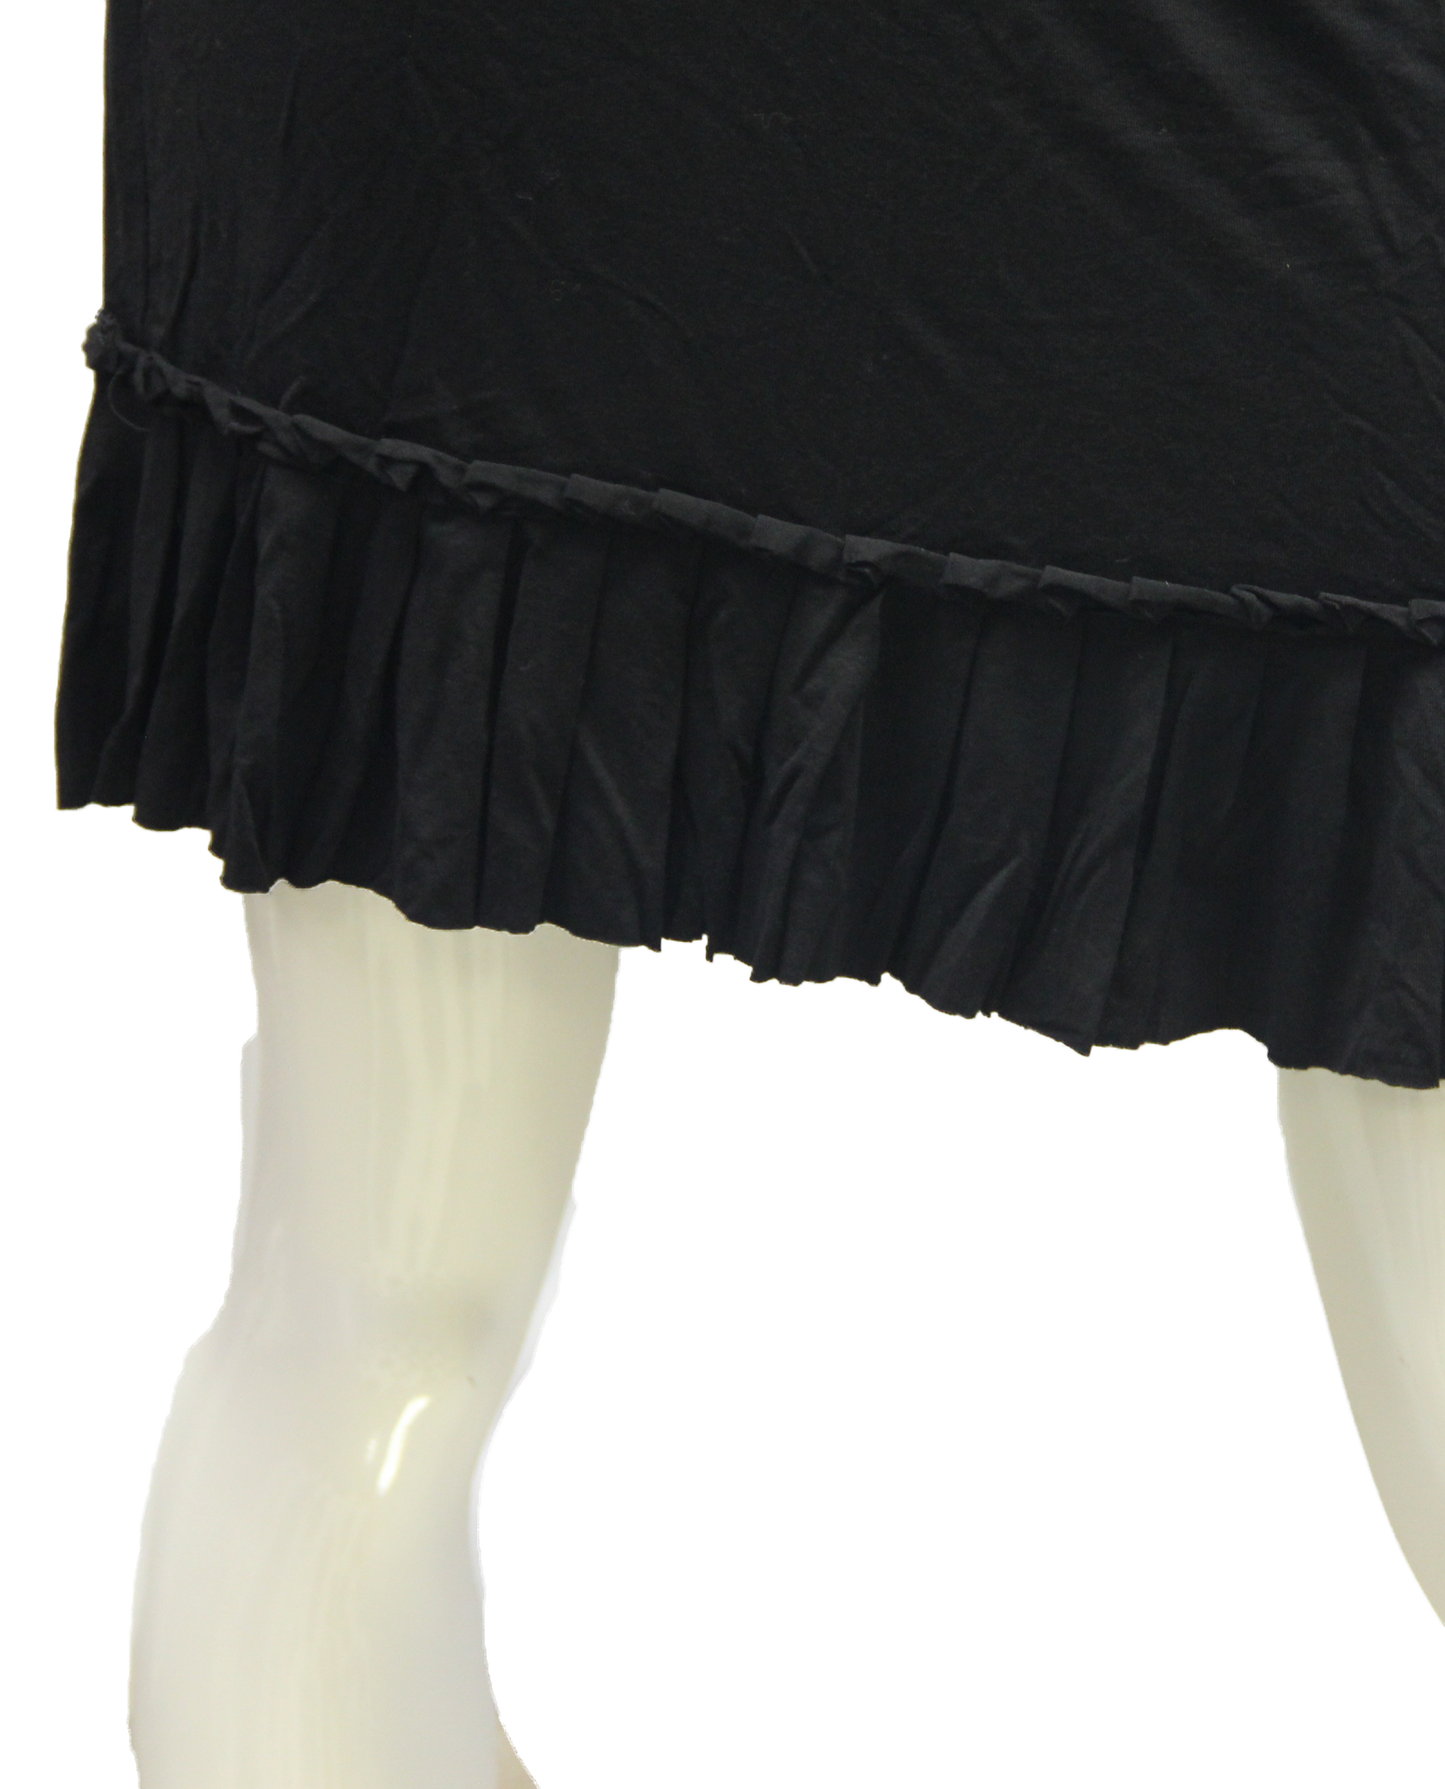 Load image into Gallery viewer, Max Studio Black Skirt with Ruffle Bottom Size Small (SKU 000028) - Designers On A Dime - 2
